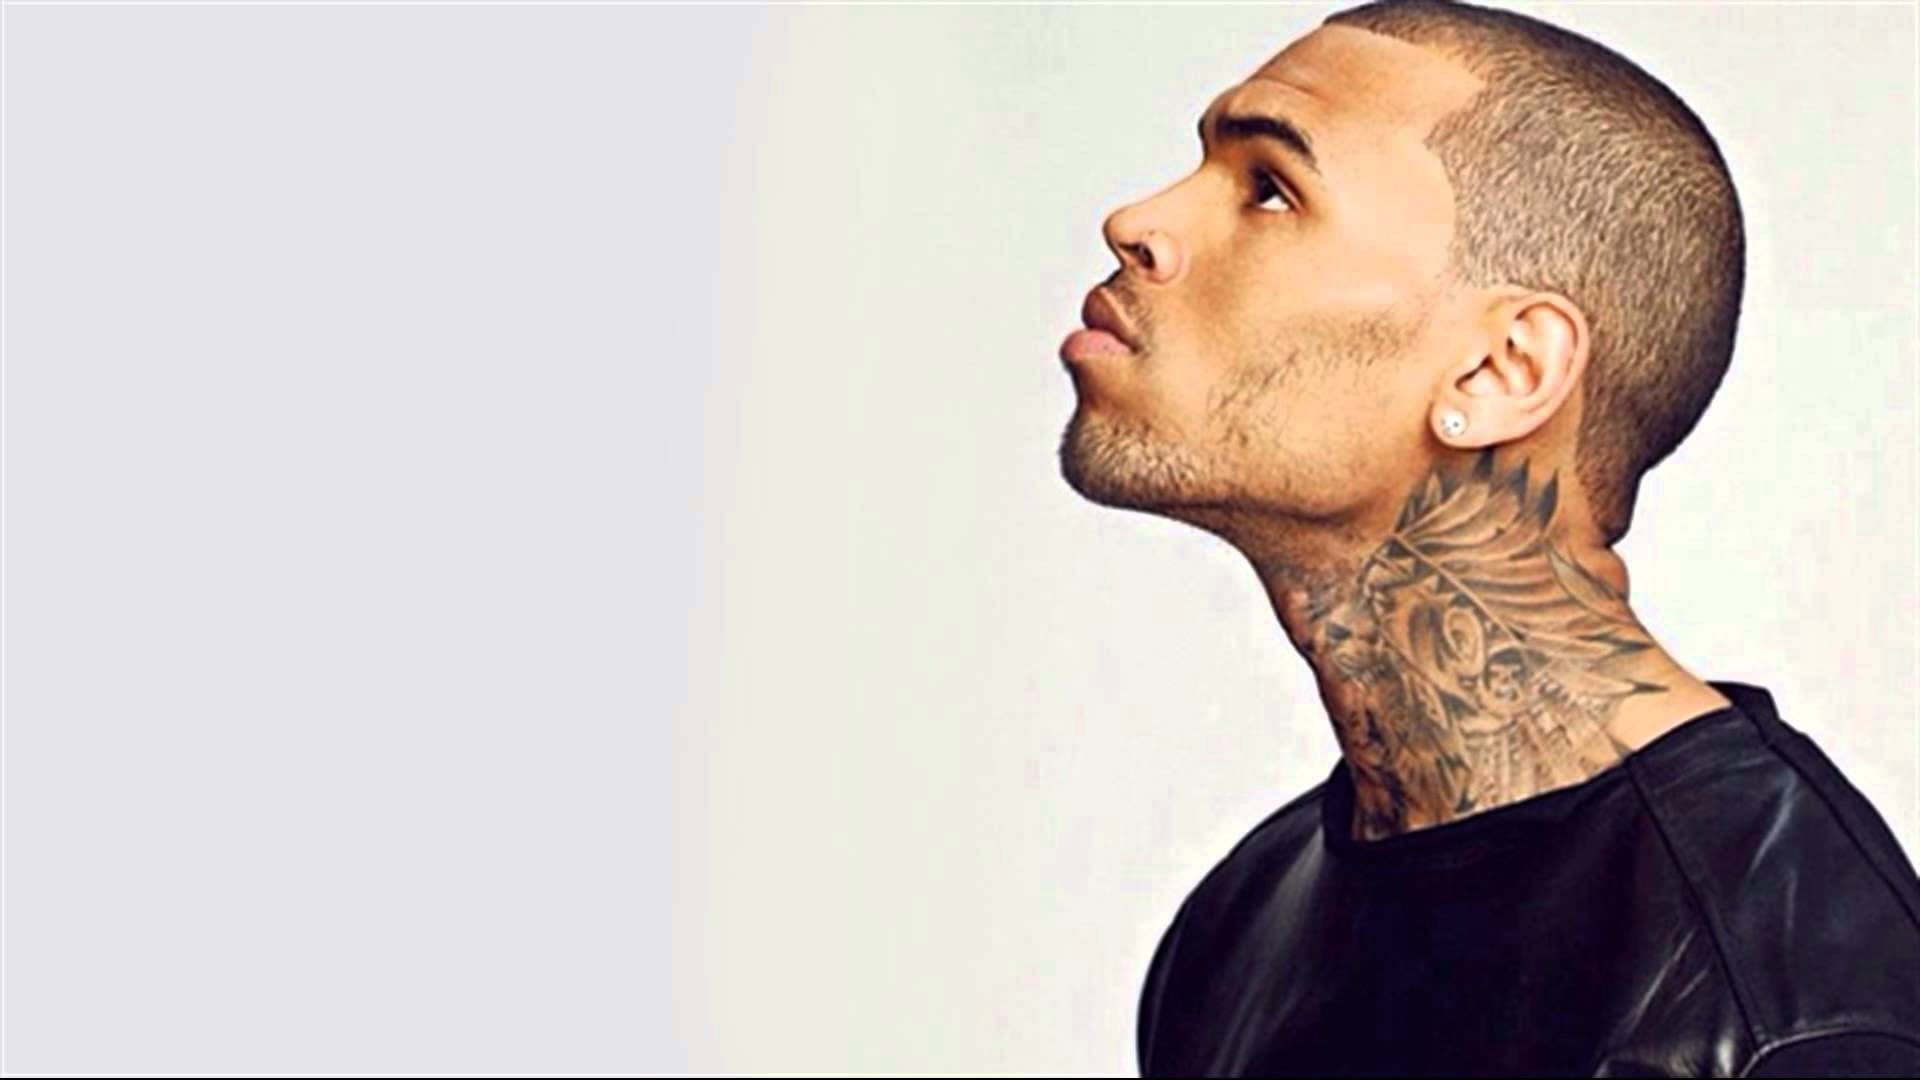 chris brown, one person, young adult, copy space, profile view